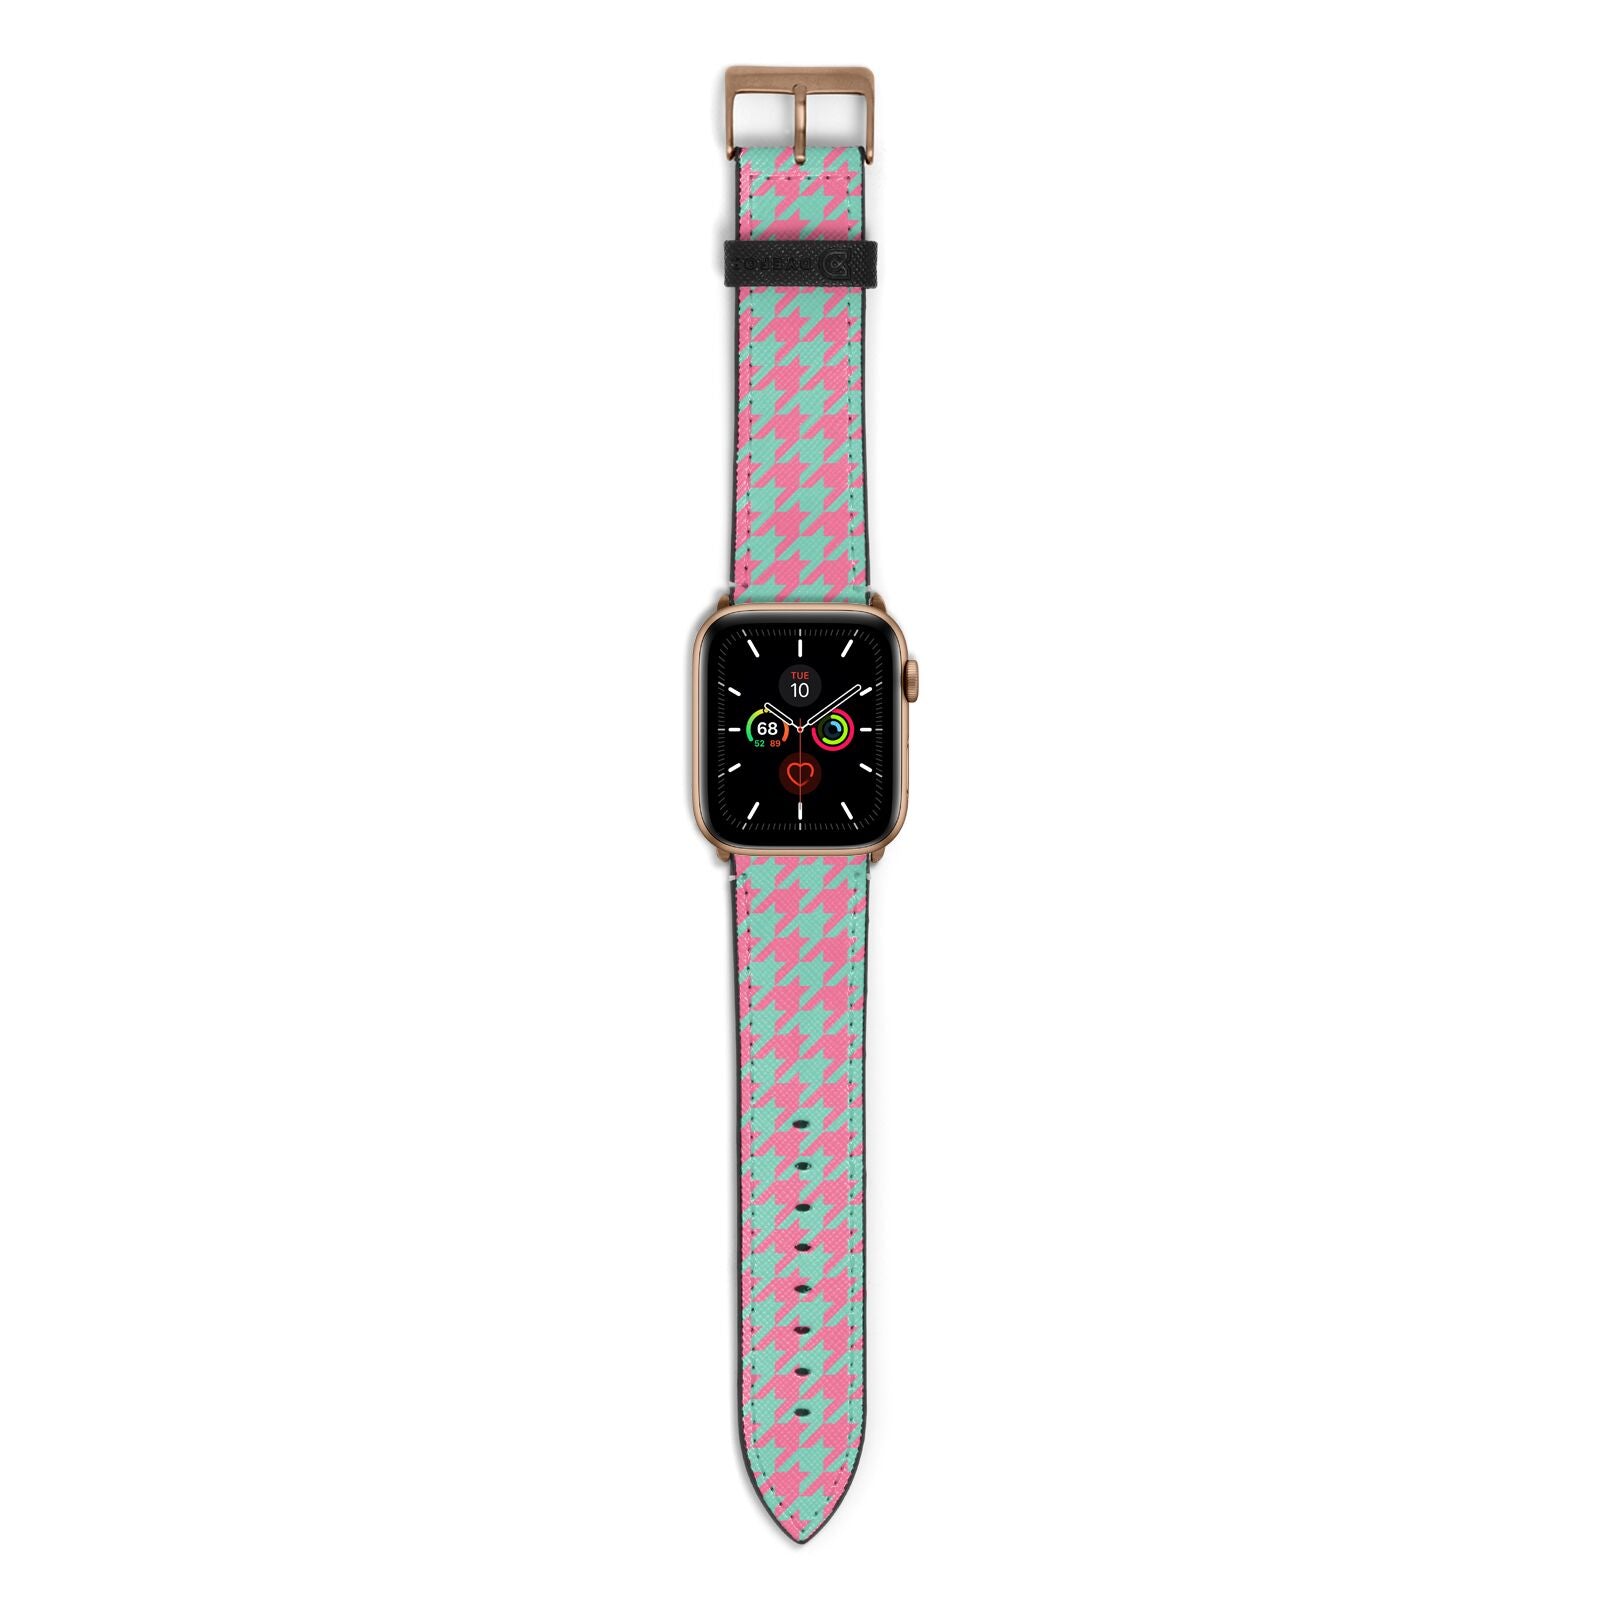 Pink Houndstooth Apple Watch Strap with Gold Hardware